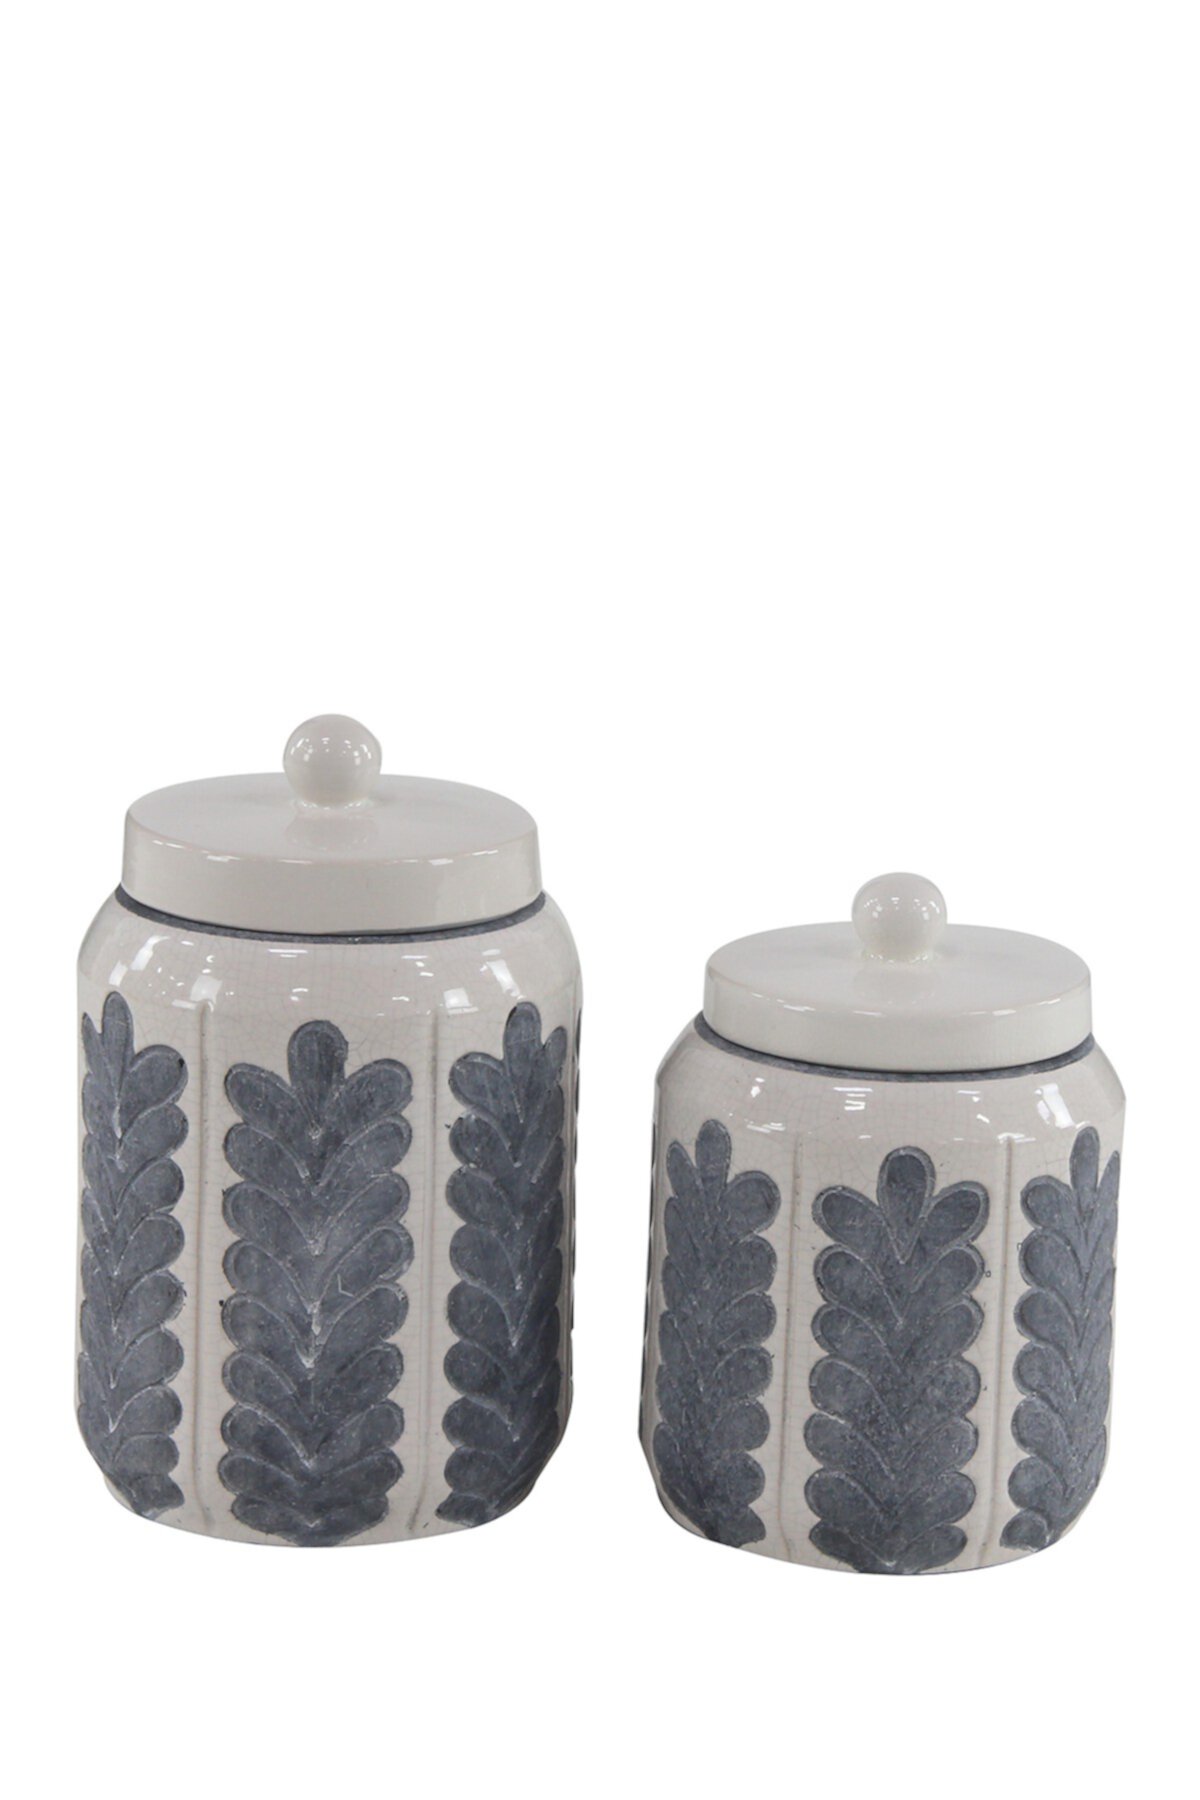 Country Cottage Decorative Ceramic Jars - Set of 2 Willow Row